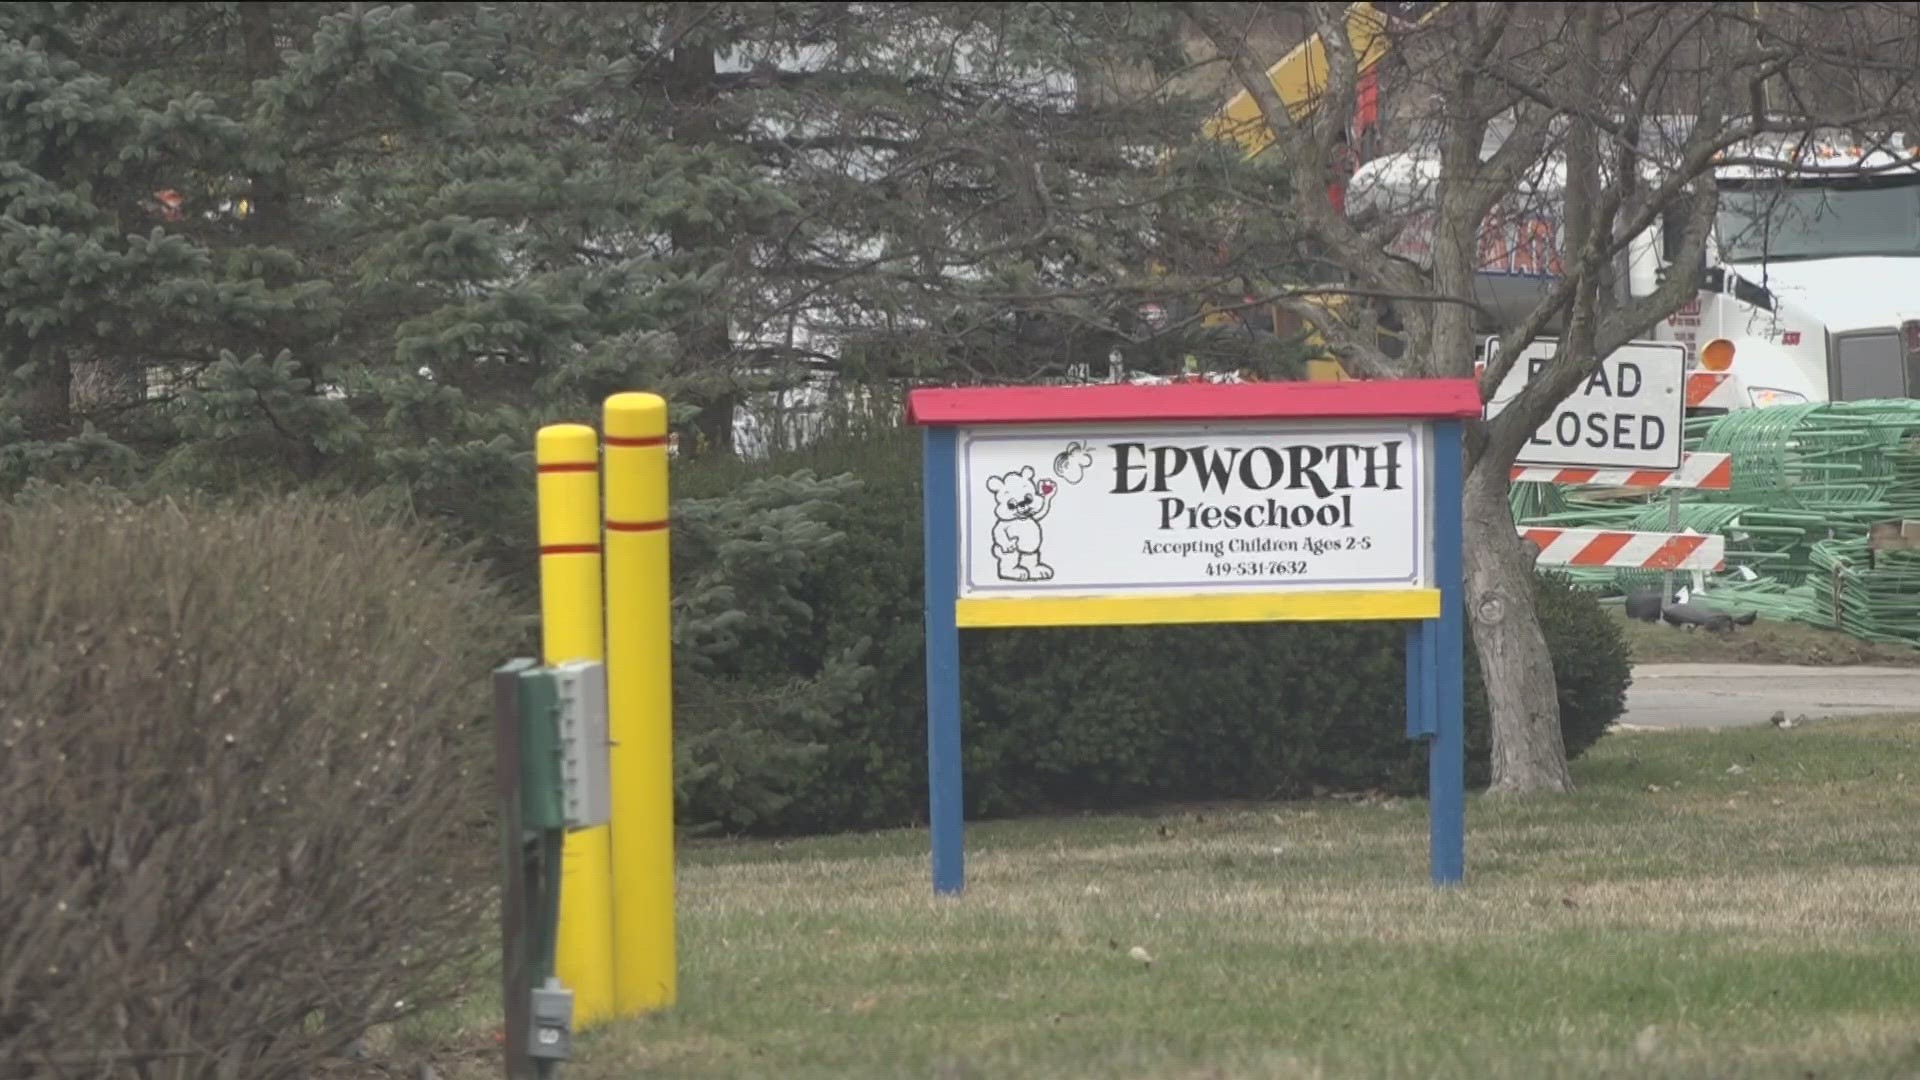 Epworth Preschool closed with no warning in early March, parents said. They have yet to receive refunds or an explanation and want transparency from the church.